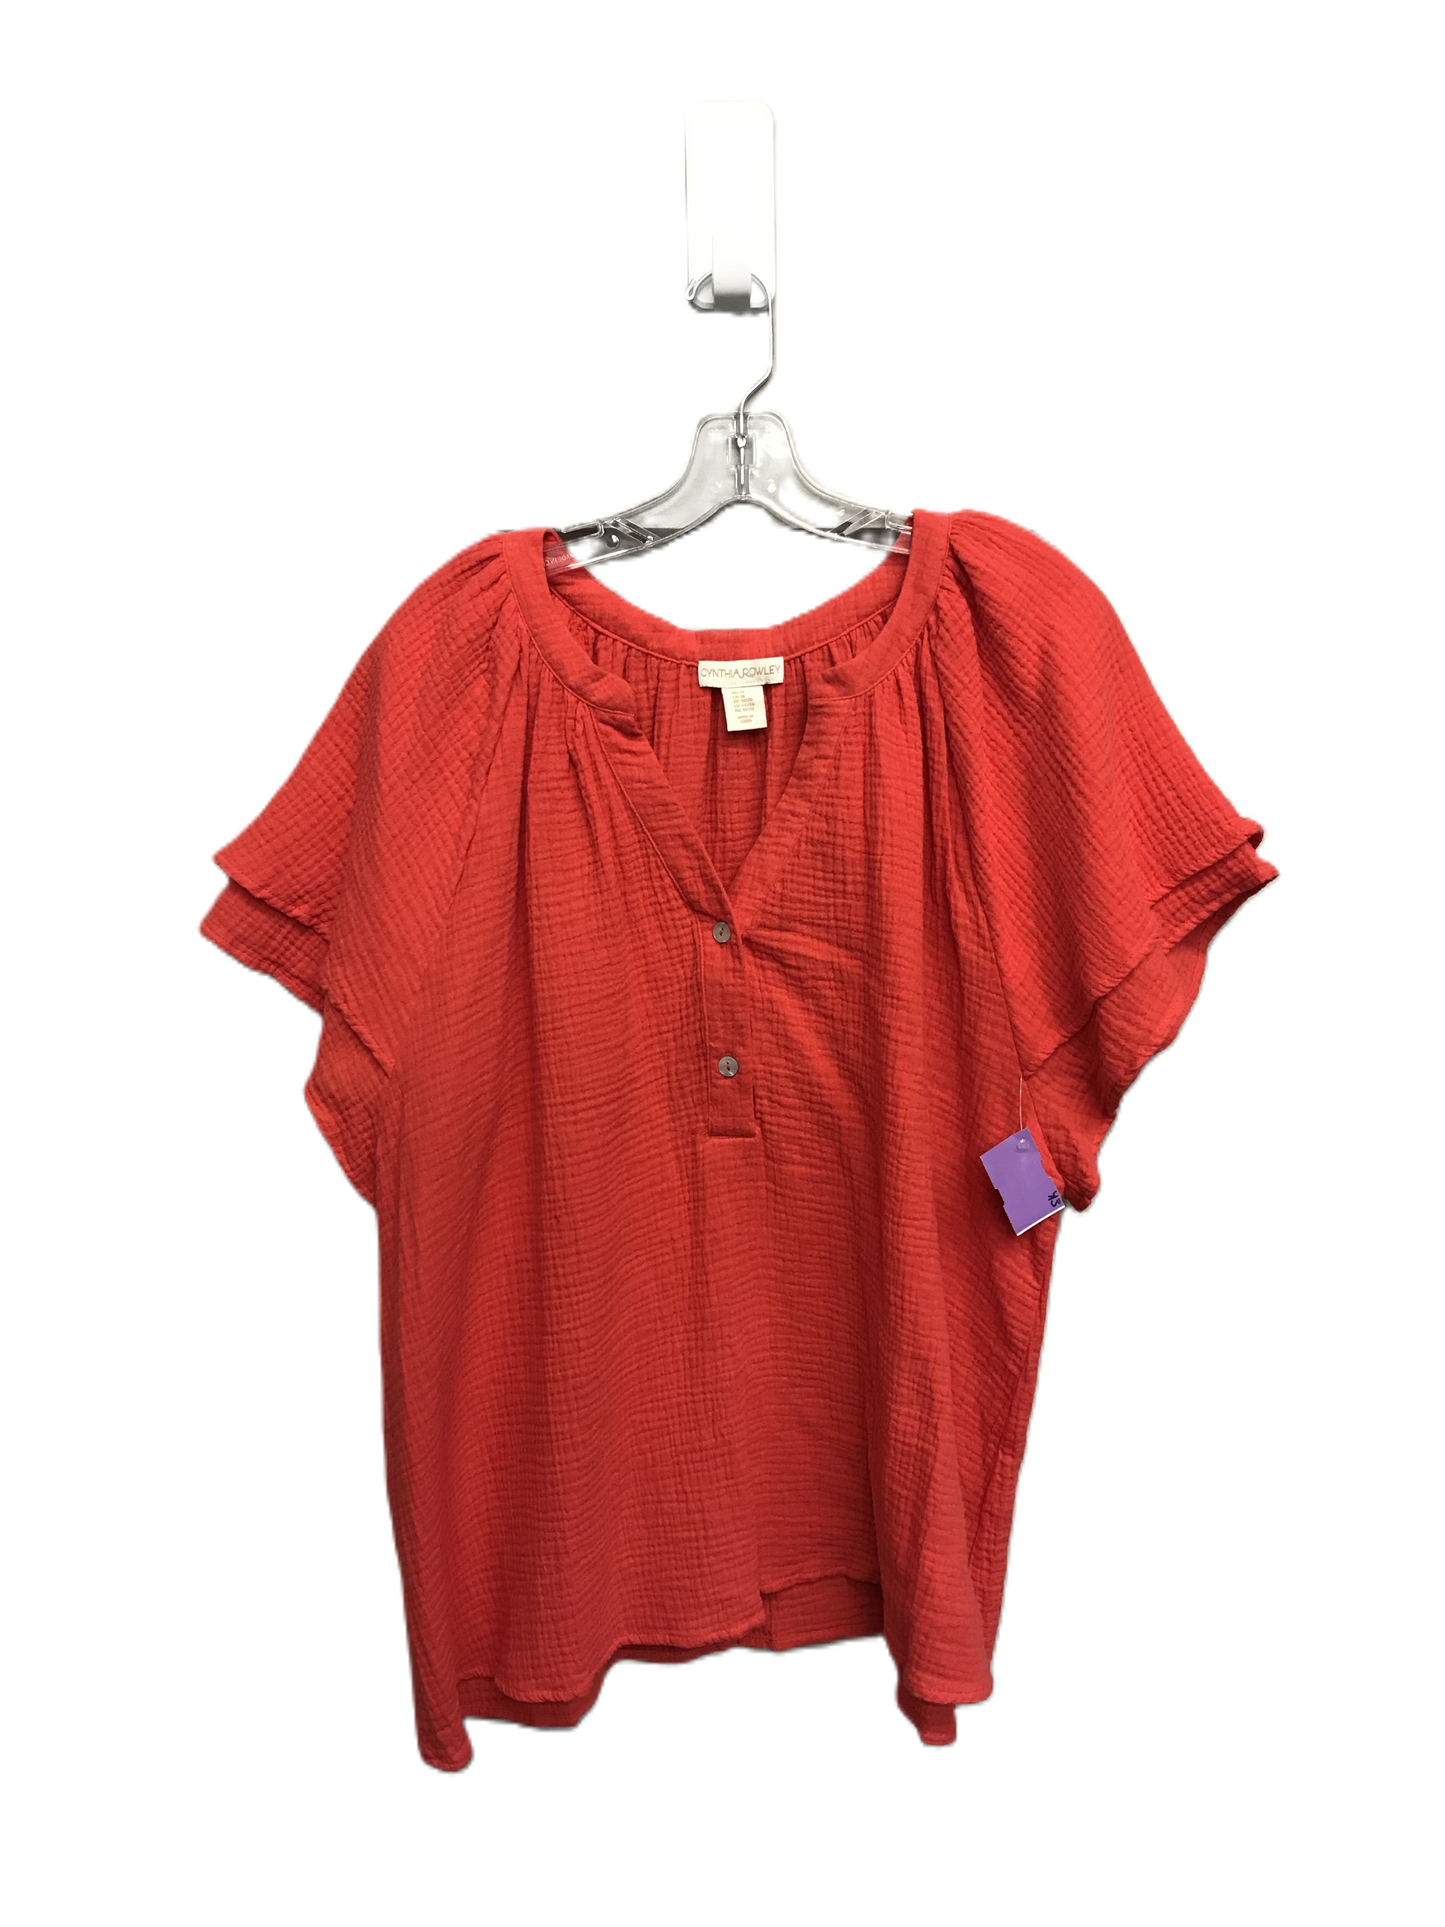 Red Top Short Sleeve By Cynthia Rowley, Size: 1x